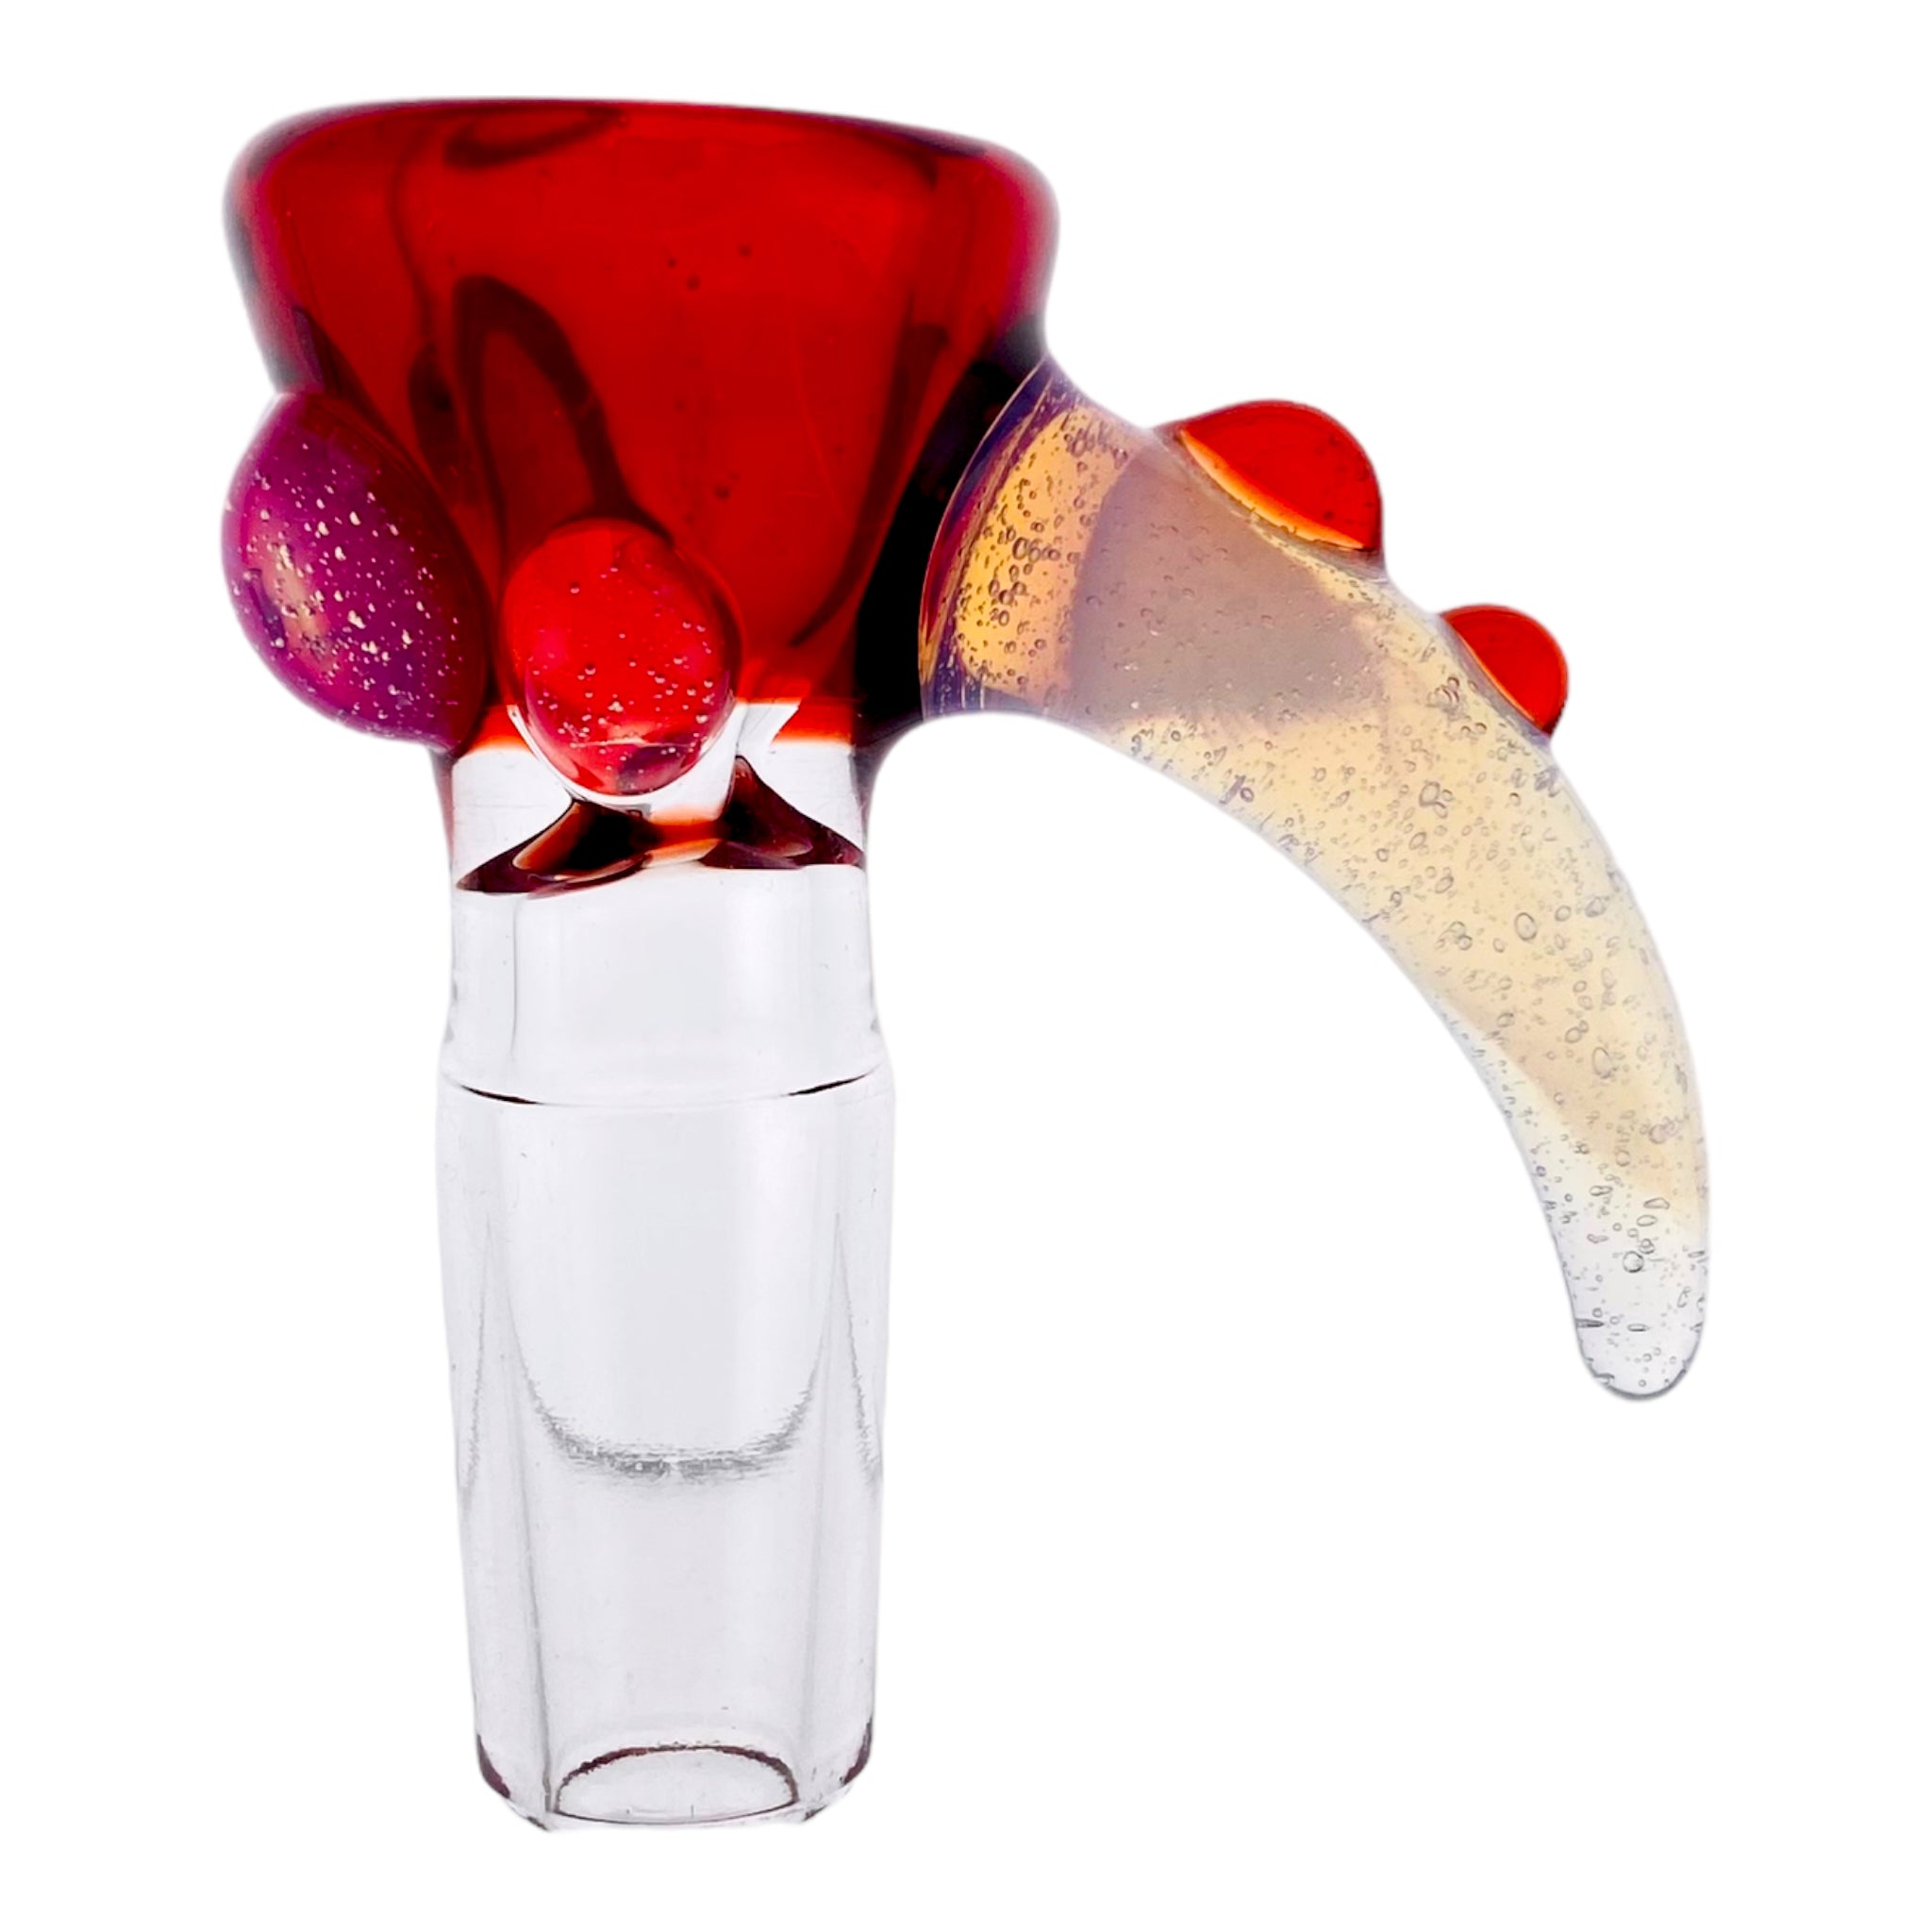 Arko Glass - 14mm Flower Bowl - Crimson Red With Mustic Fume Handle & Dots